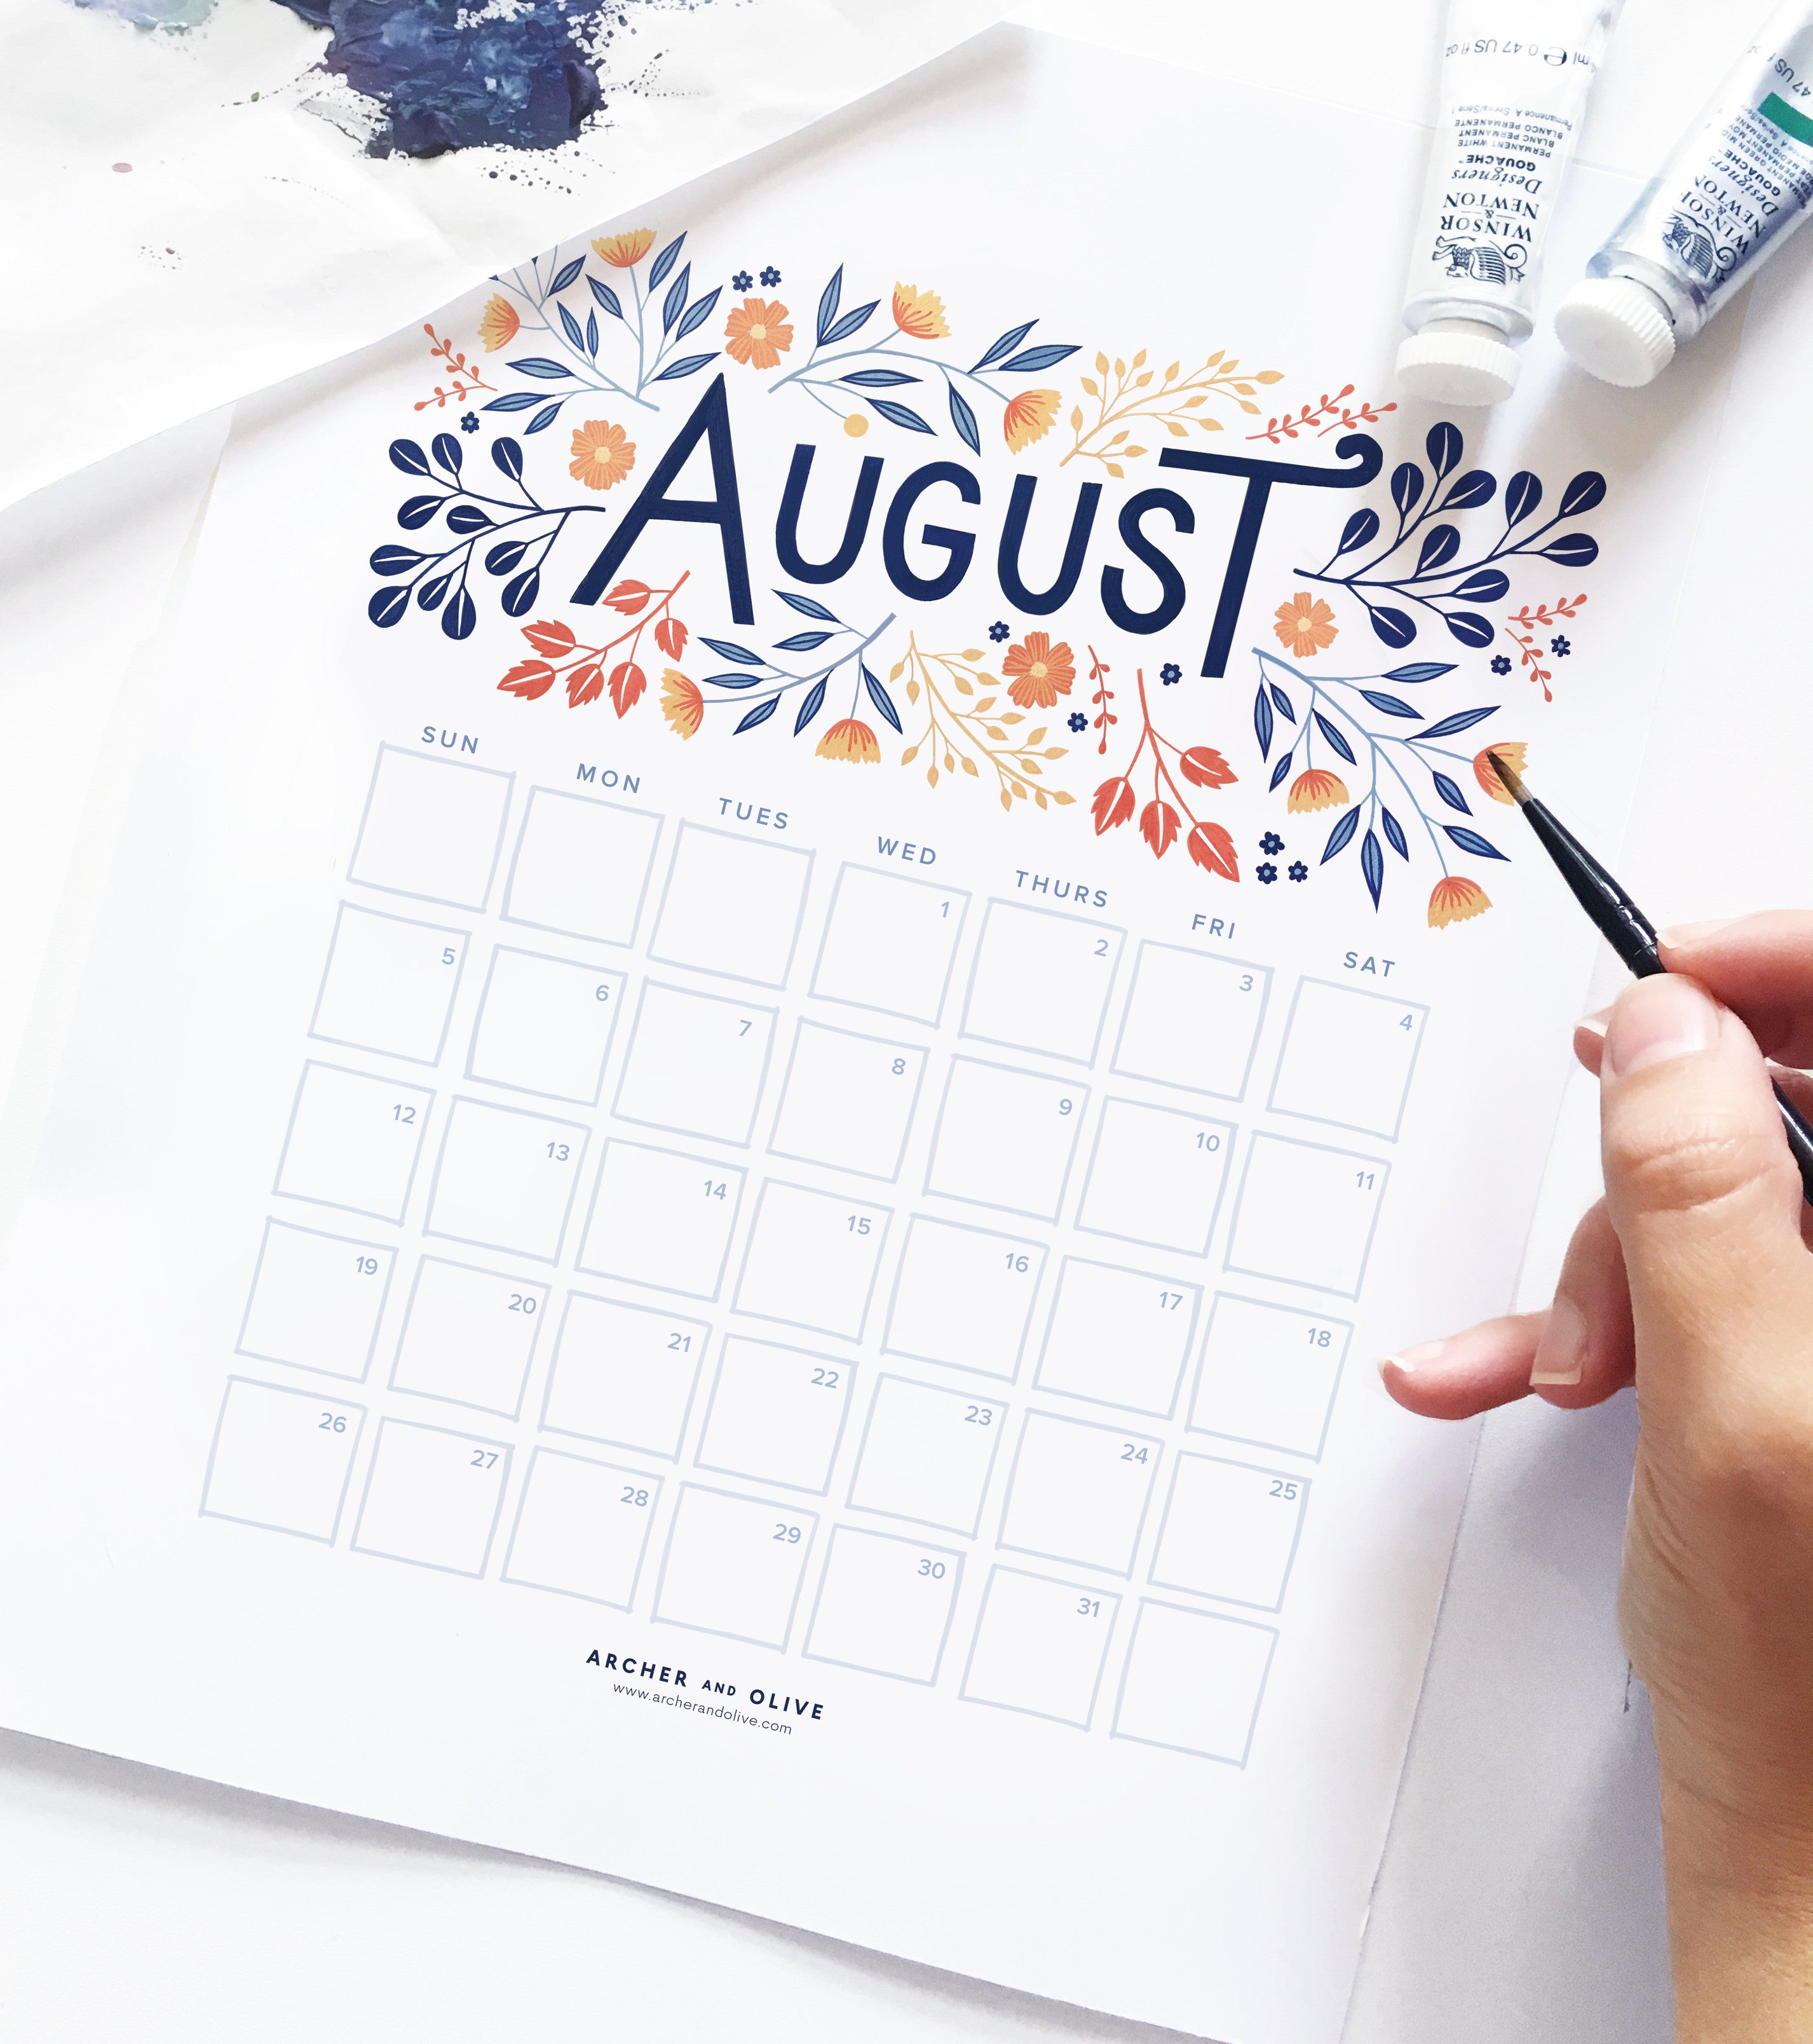 freebie-friday-august-2017-printable-calendar-archer-and-olive